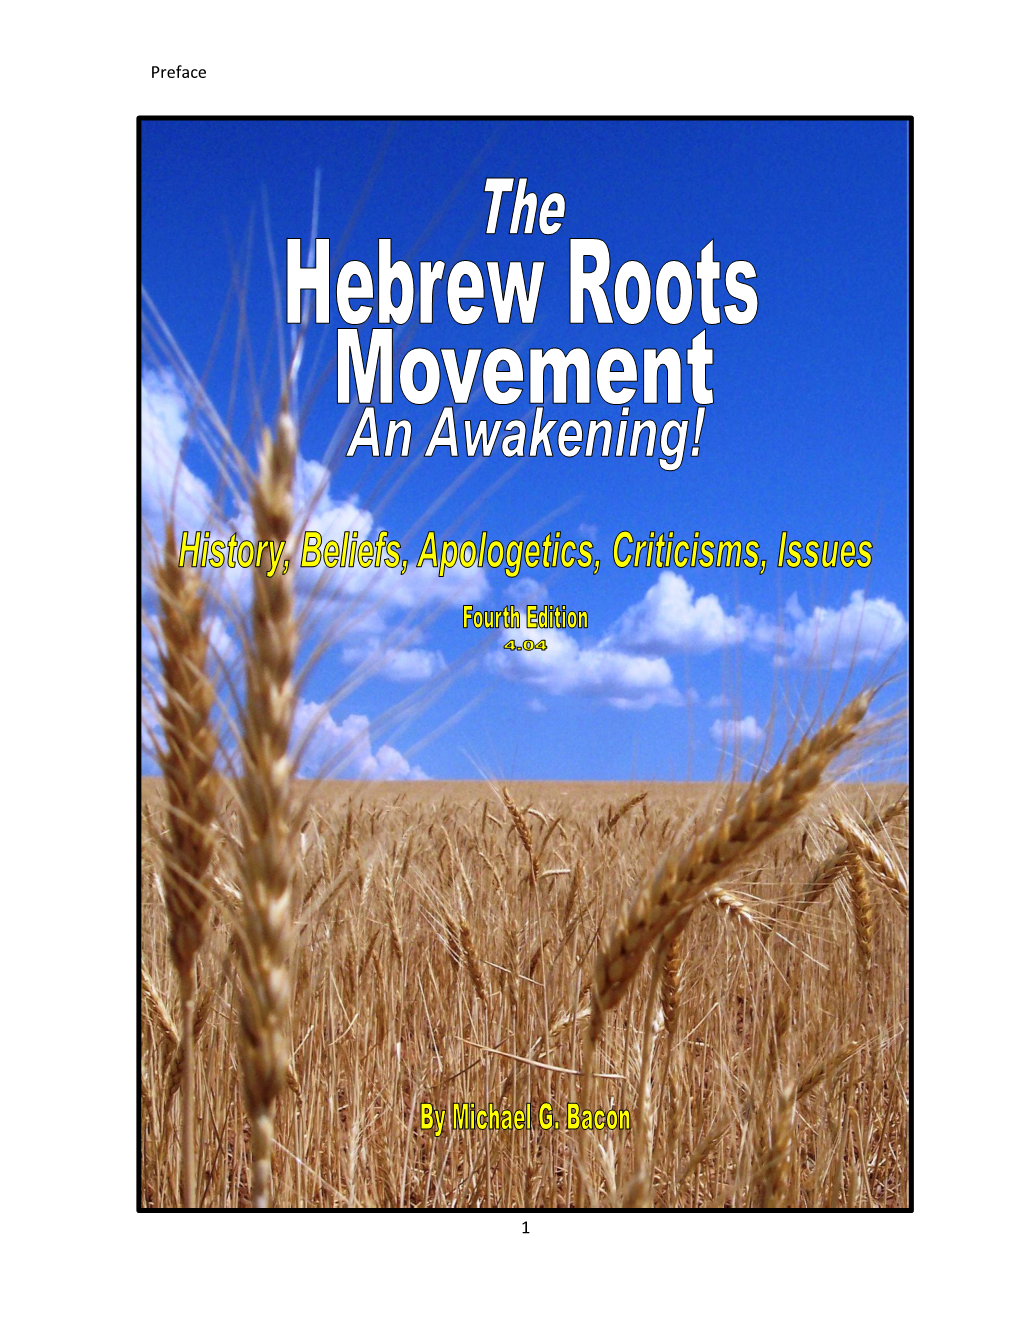 The Hebrew Roots Movement: an Awakening! History, Beliefs, Apologetics, Criticisms, Issues Fourth Edition 4.04 6/20/20